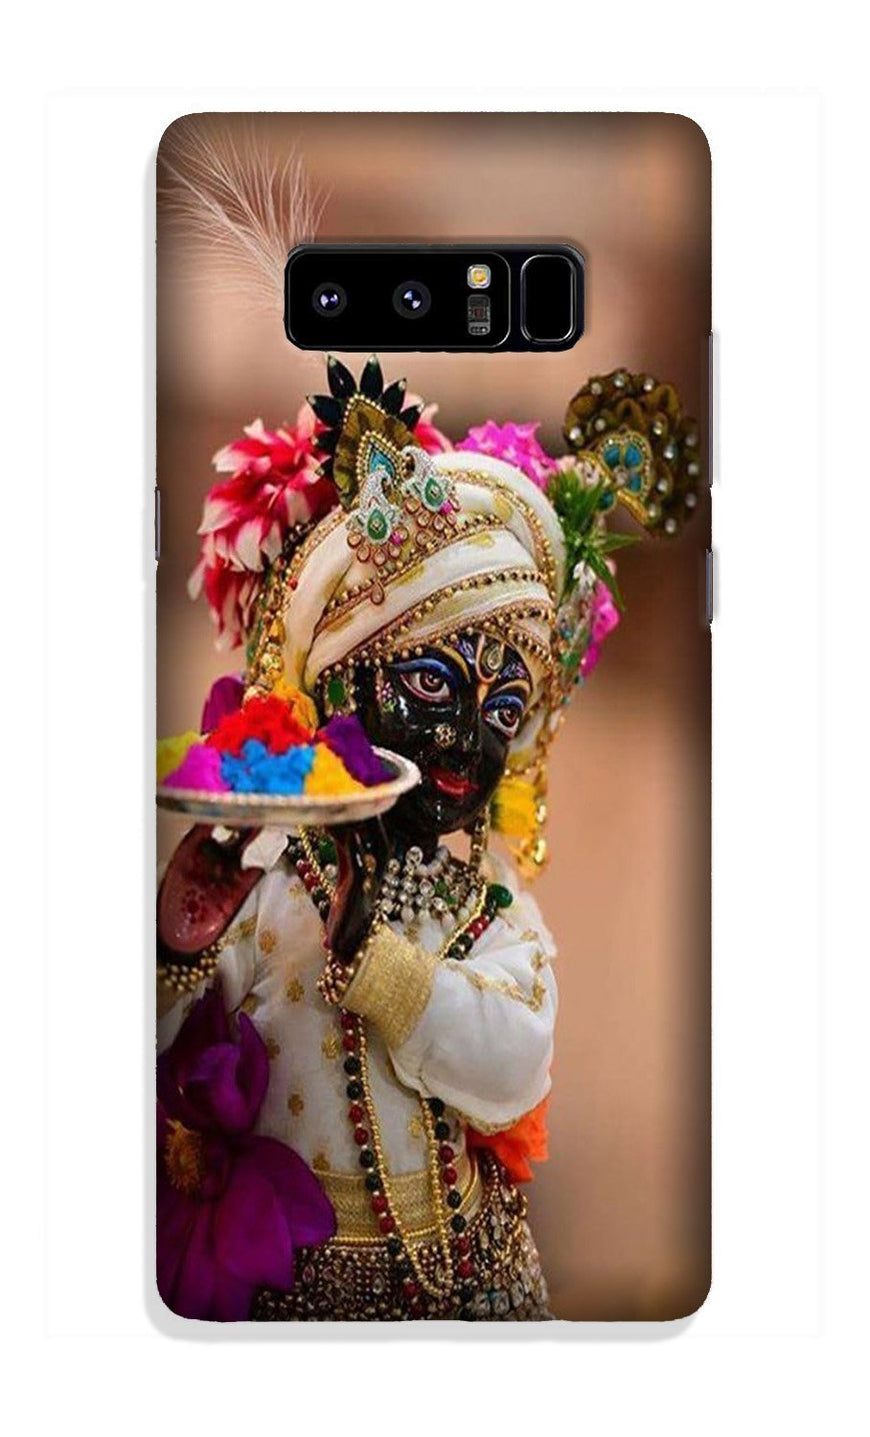 Lord Krishna2 Case for Galaxy Note 8